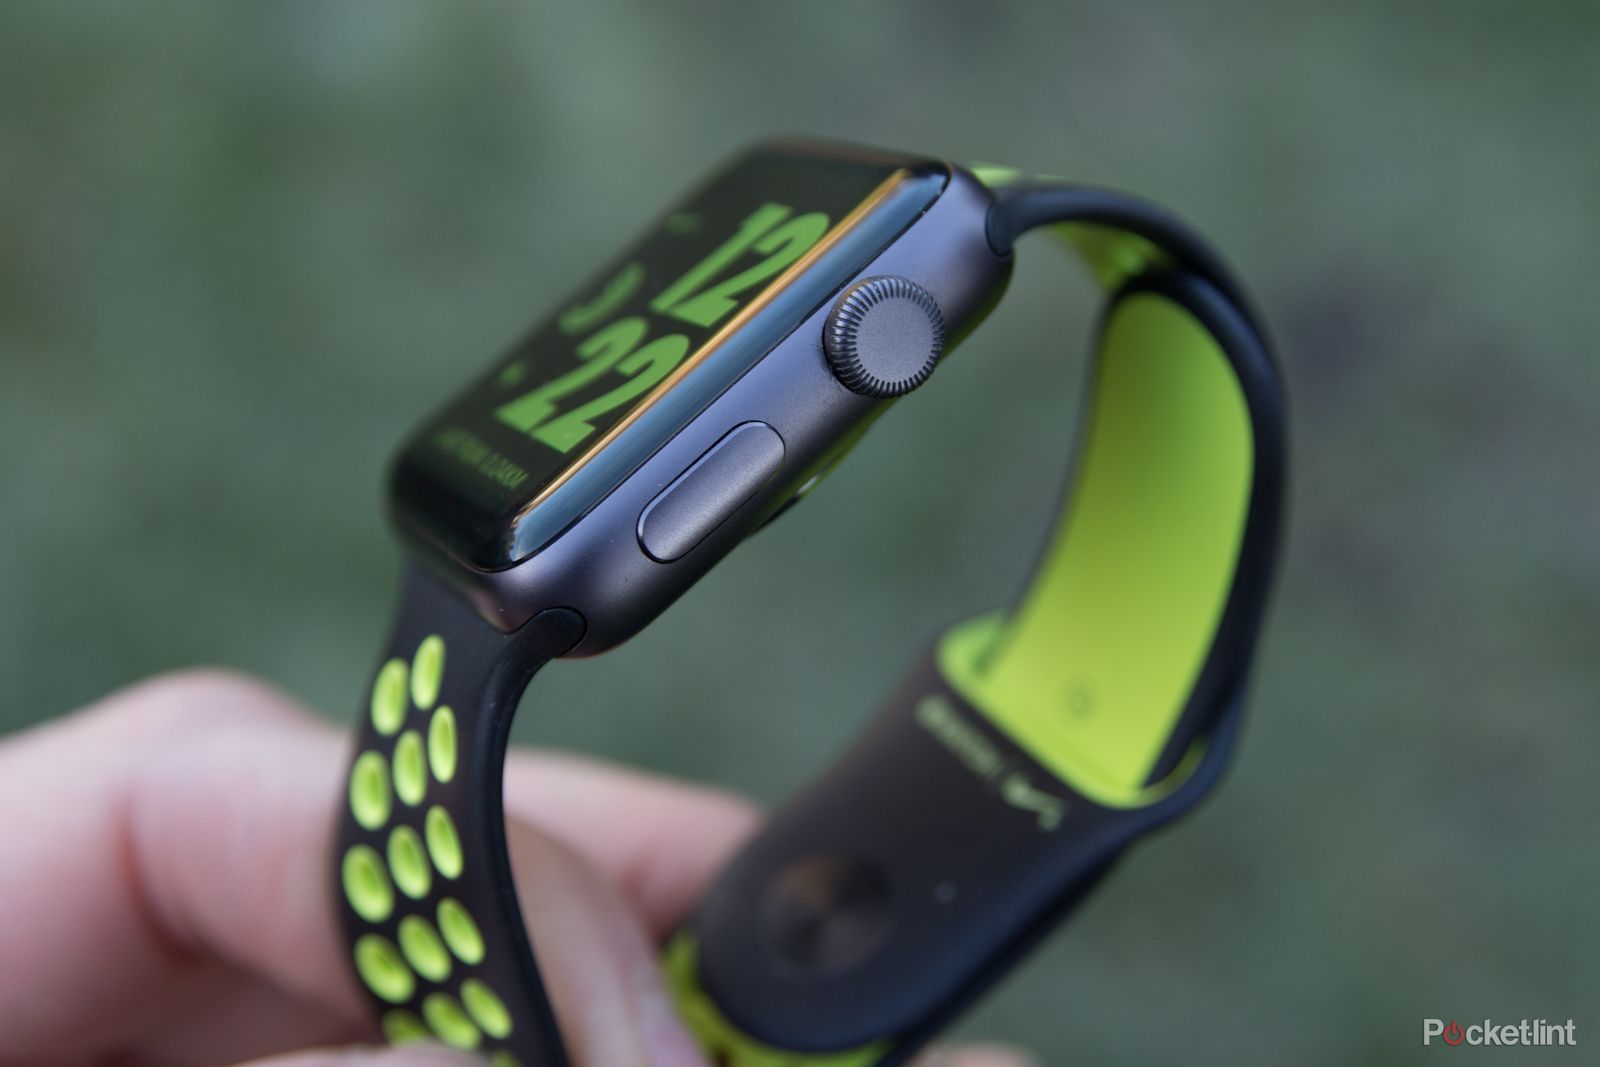 Apple Watch with Nike band